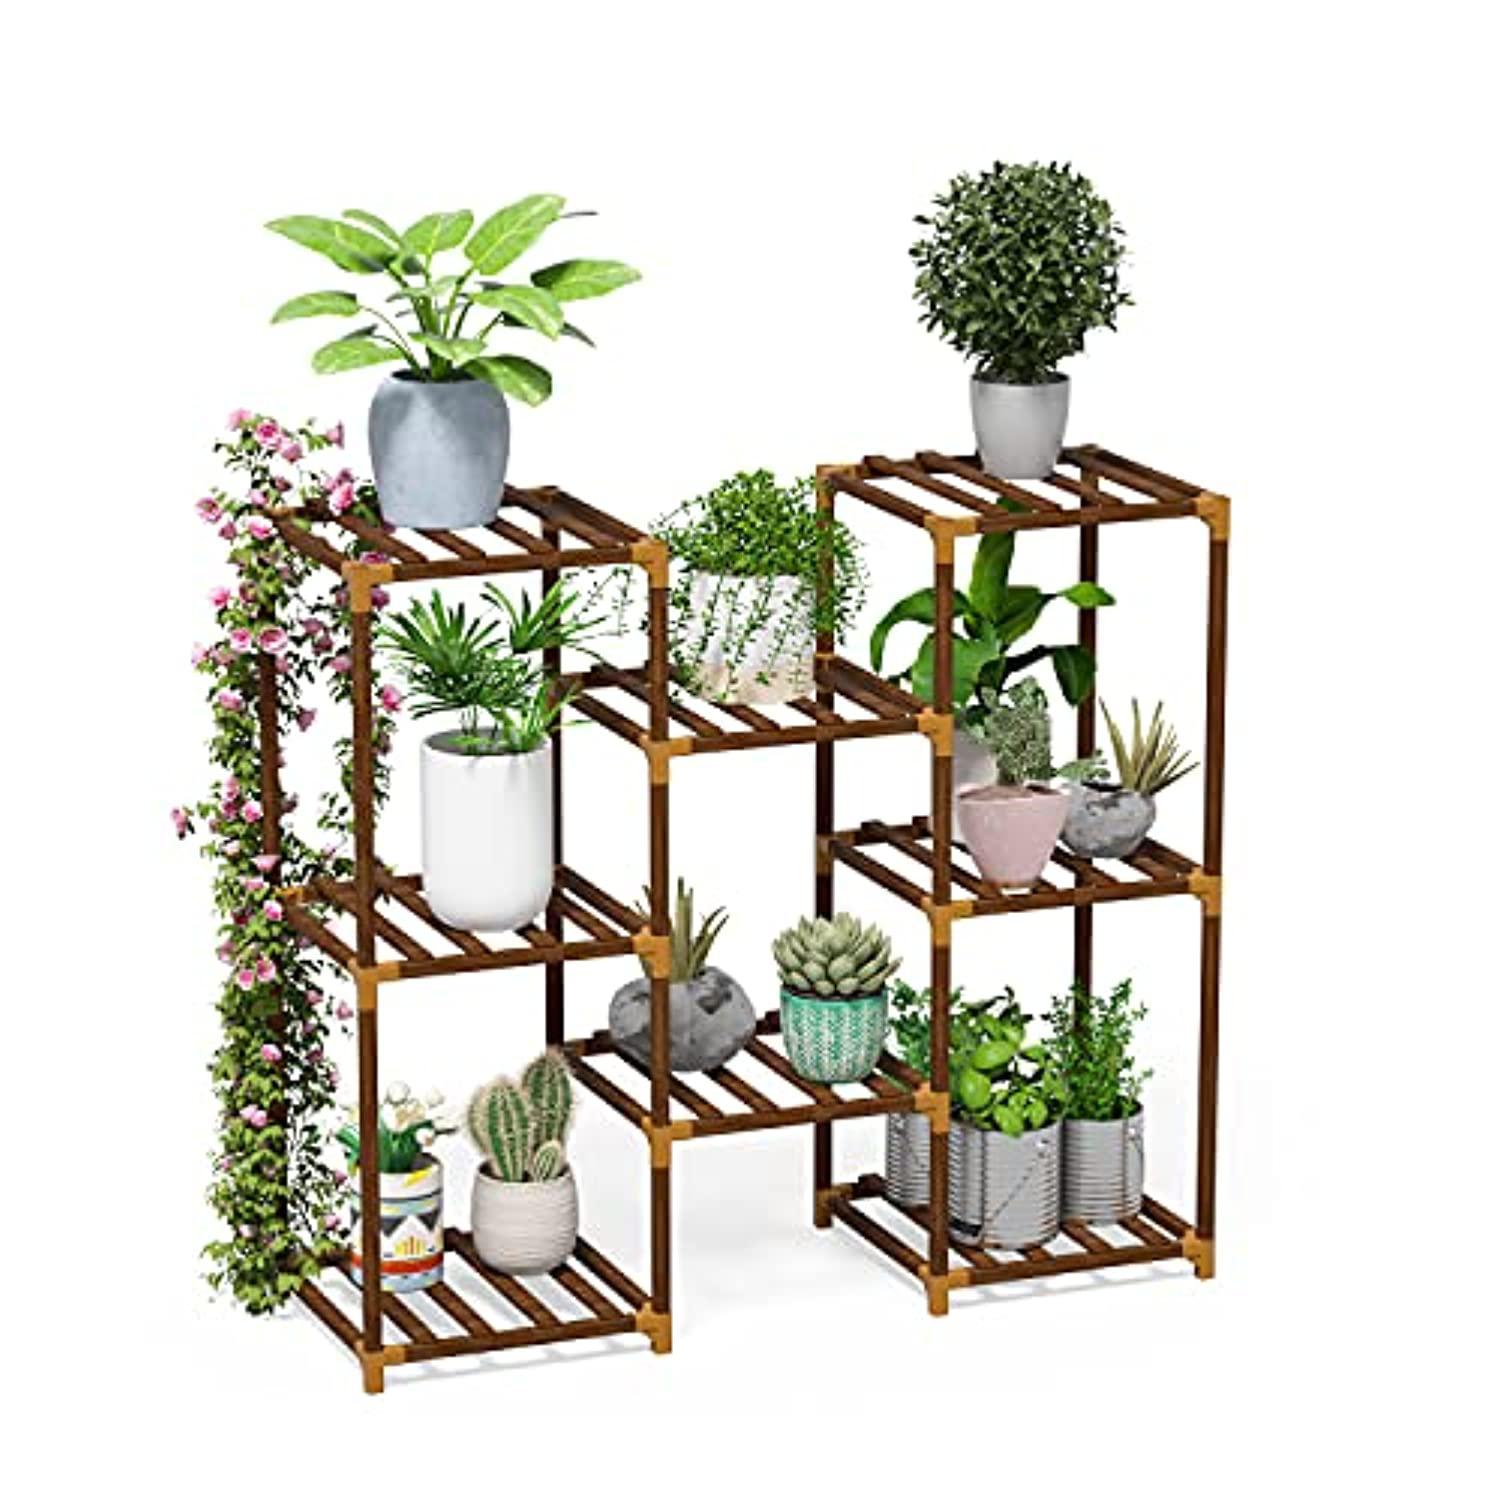 new england stories plant stand, 3 tier 8 potted wood multiple stand shelf, garden plant holder rack for patio garden, corner